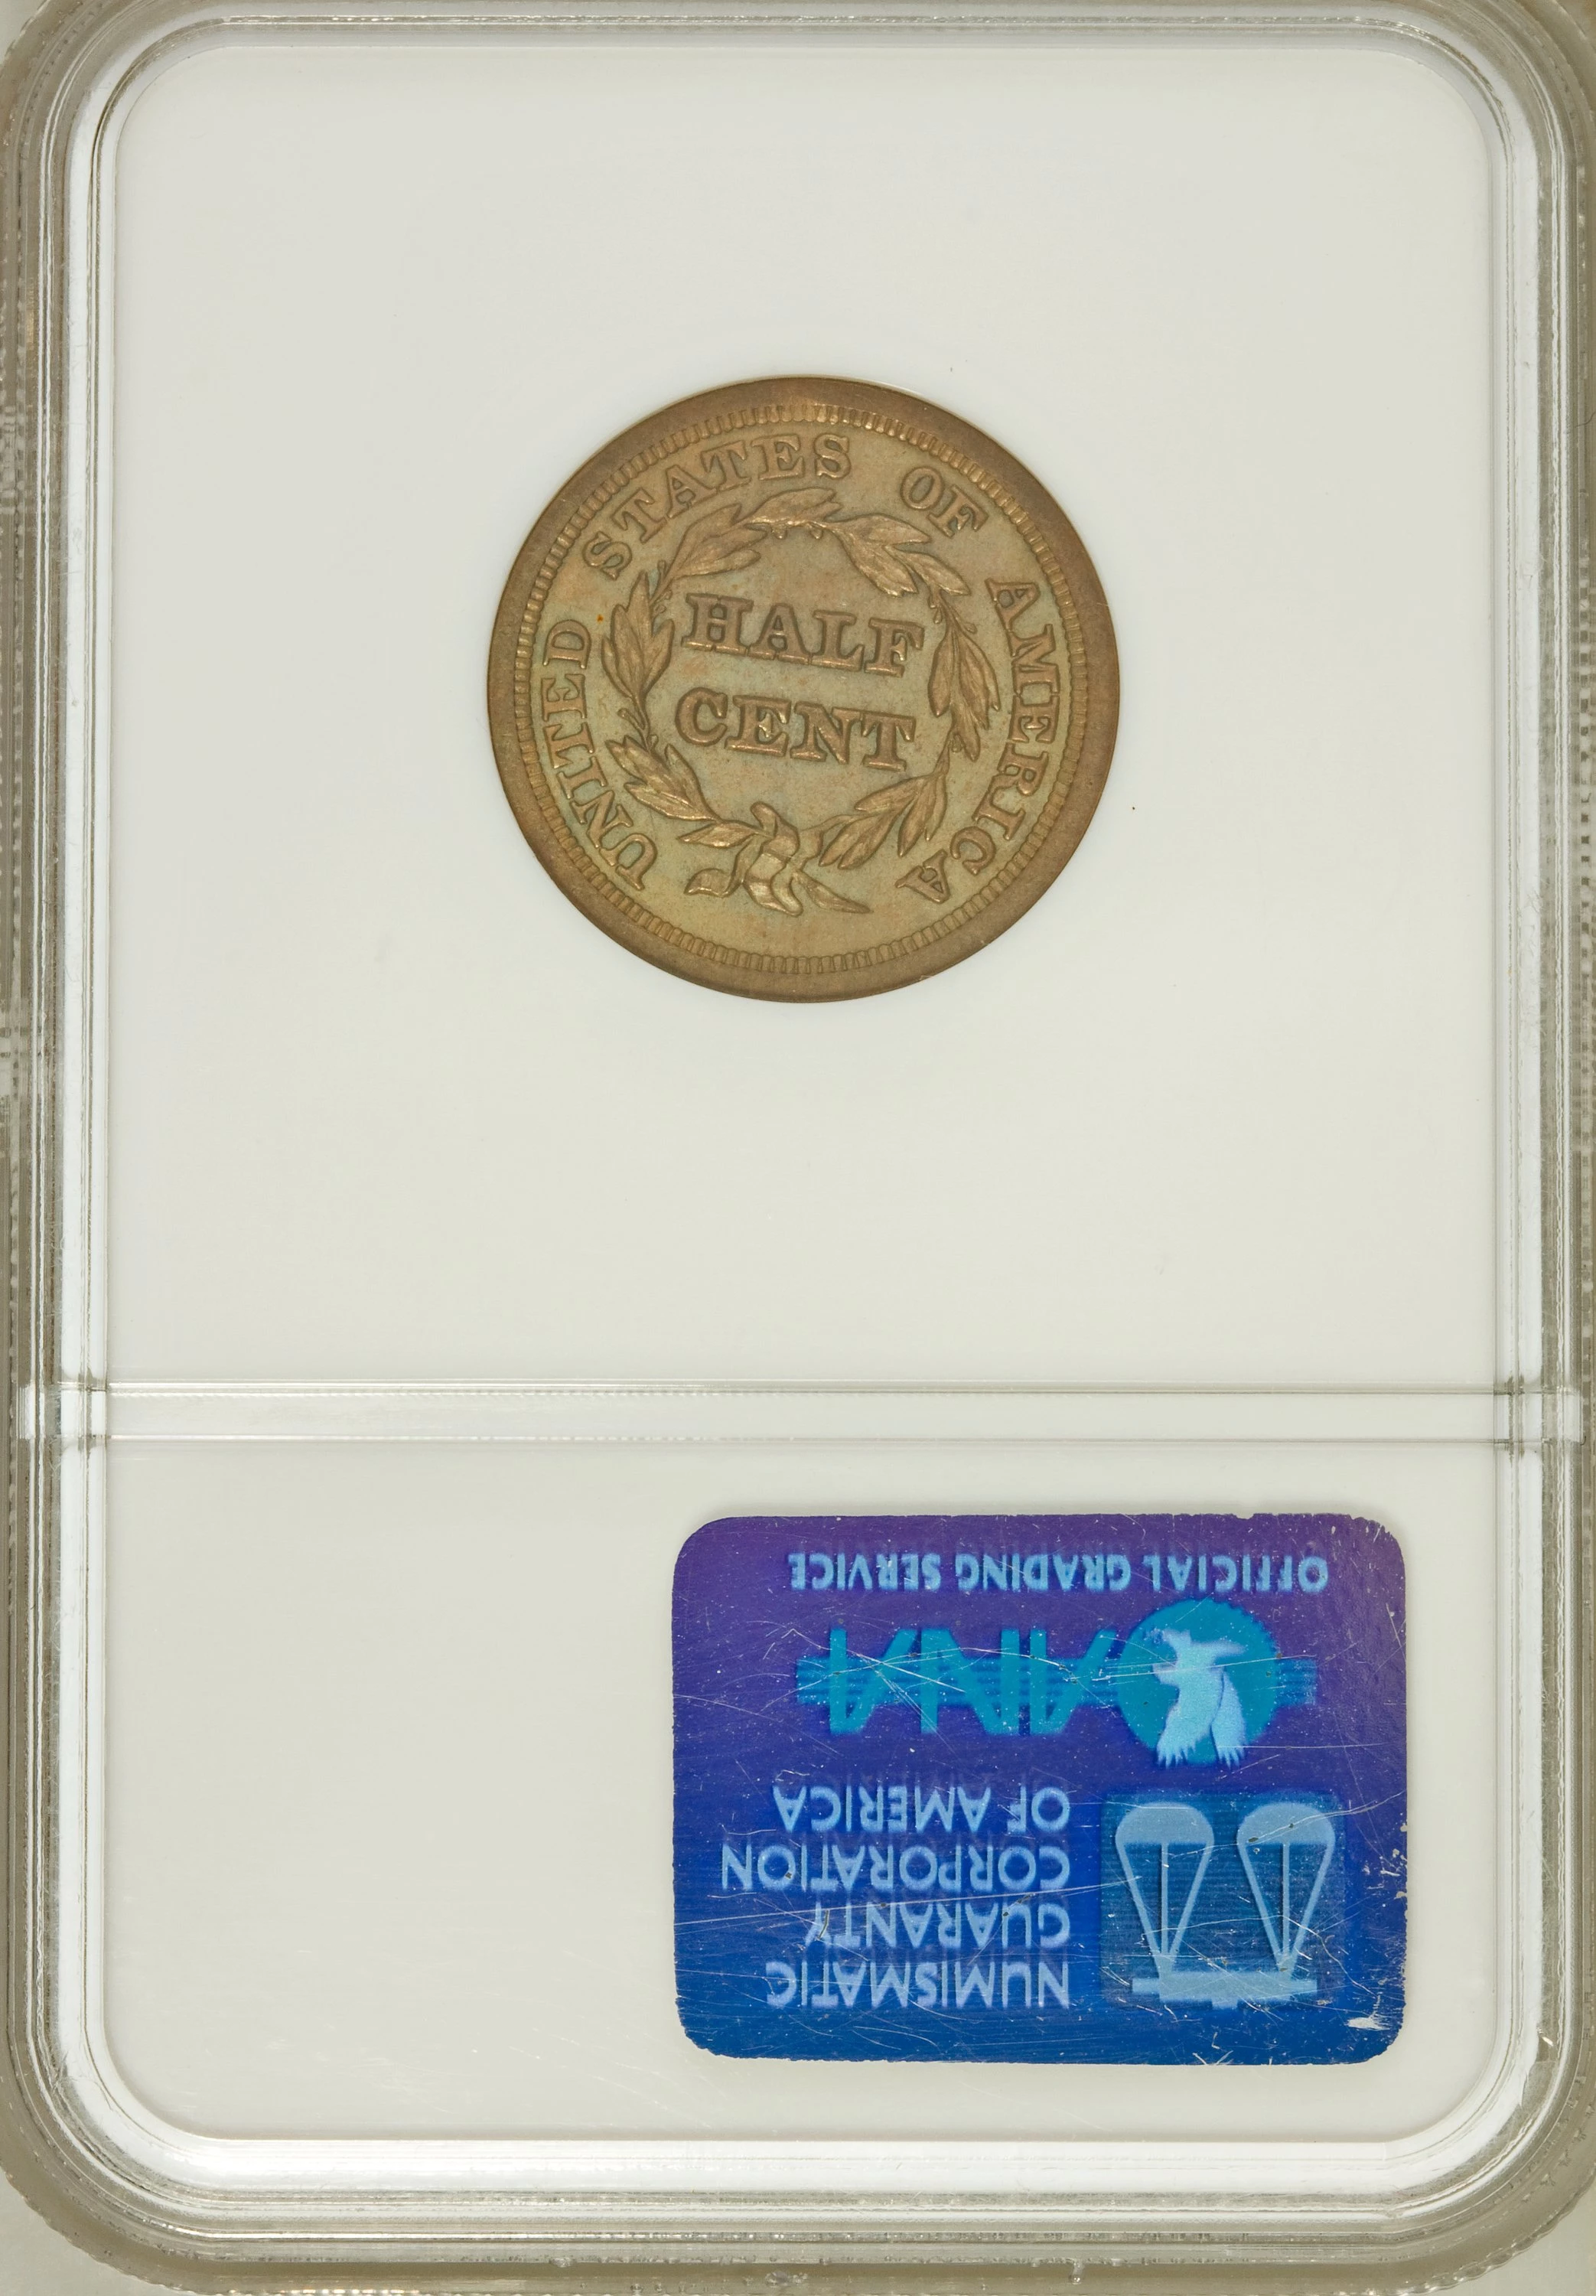 1853 Braided Hair Half Cent. C-1, the only known dies. Rarity-1. MS-66 BN  (PCGS).